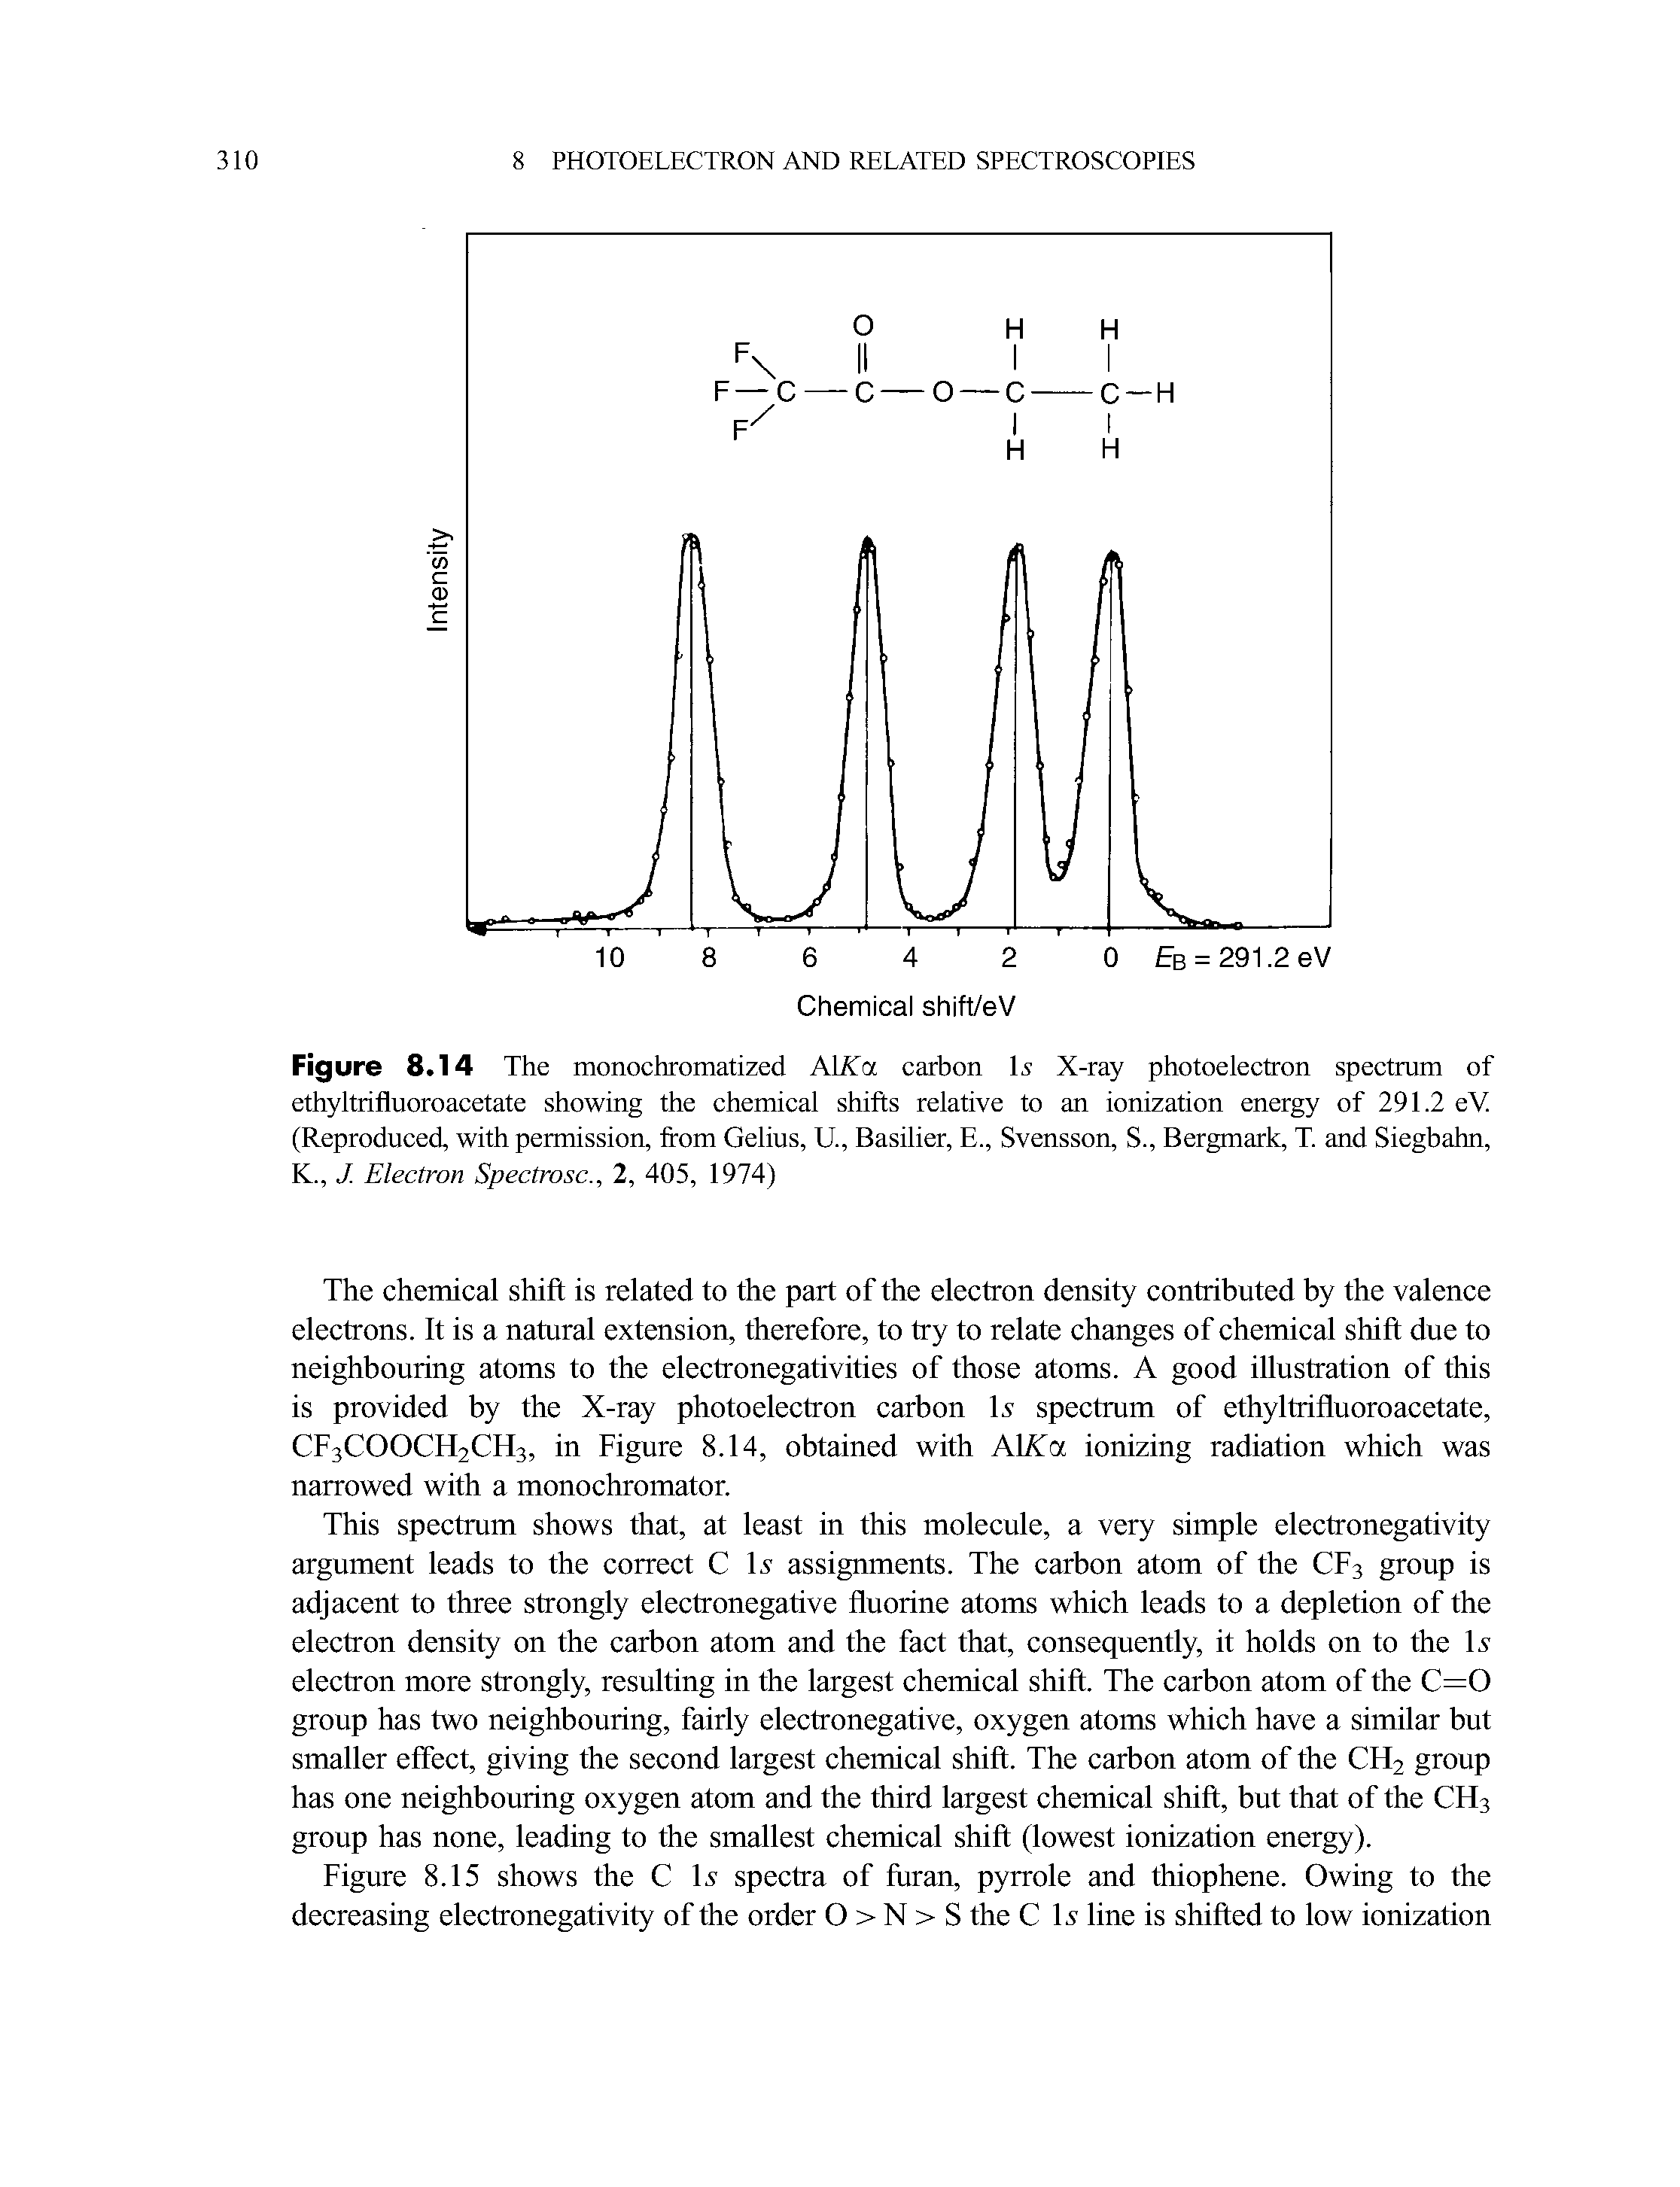 Figure 8.14 The monochromatized AlATa carbon Is X-ray photoelectron spectrum of ethyltrifluoroacetate showing the chemical shifts relative to an ionization energy of 291.2 eV (Reproduced, with permission, from Gelius, U., Basilier, E., Svensson, S., Bergmark, T. and Siegbahn, K., J. Electron Spectrosc., 2, 405, 1974)...